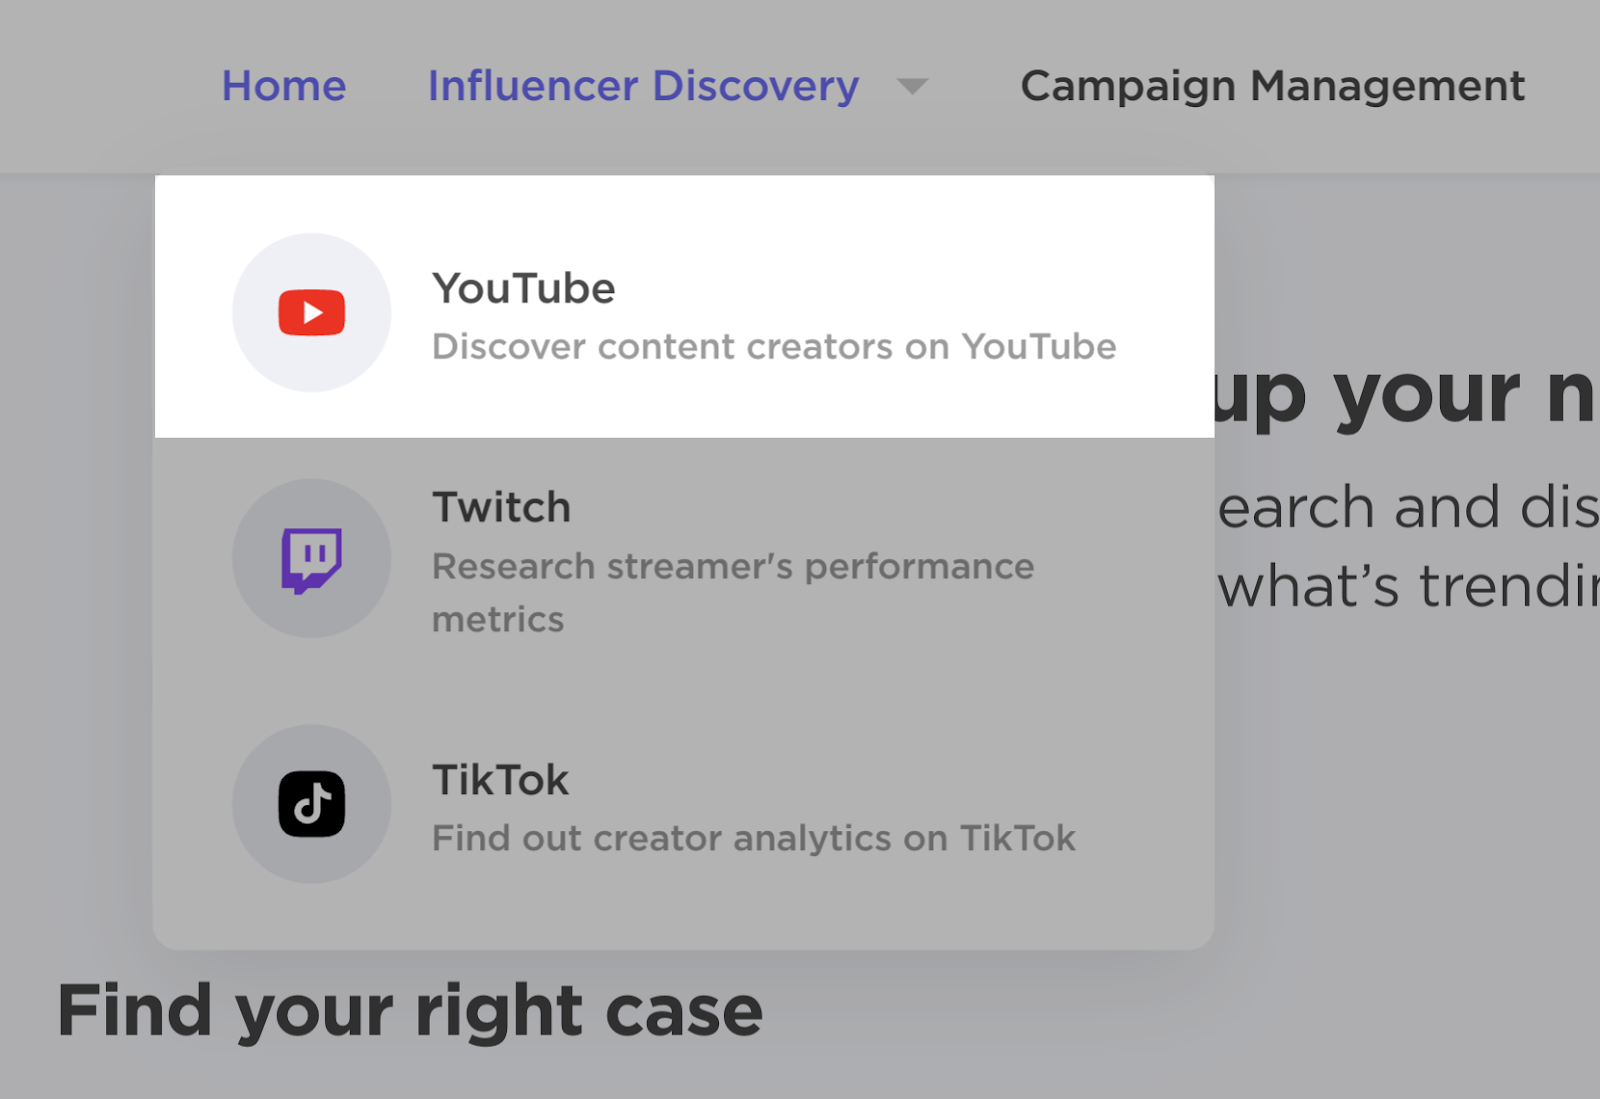 “YouTube" highlighted from the drop-down menu